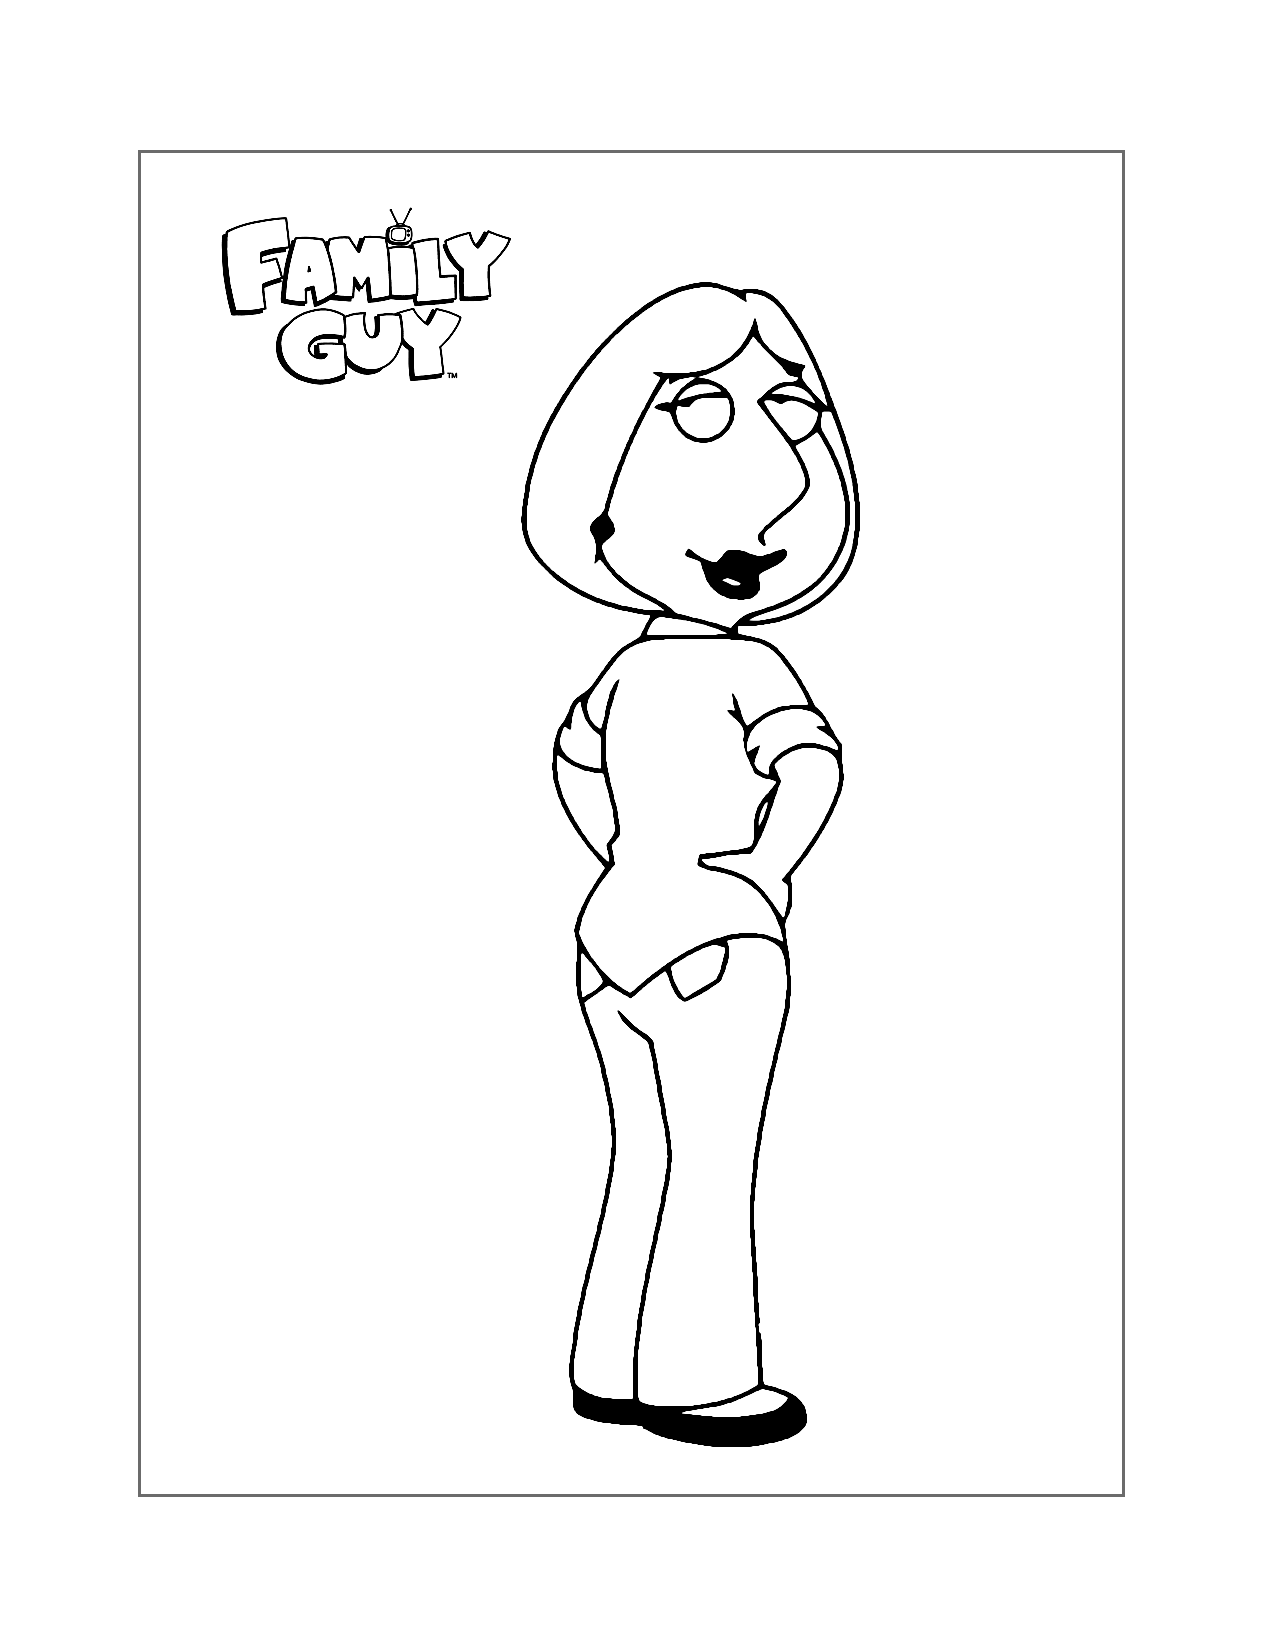 Lois Family Guy Coloring Page